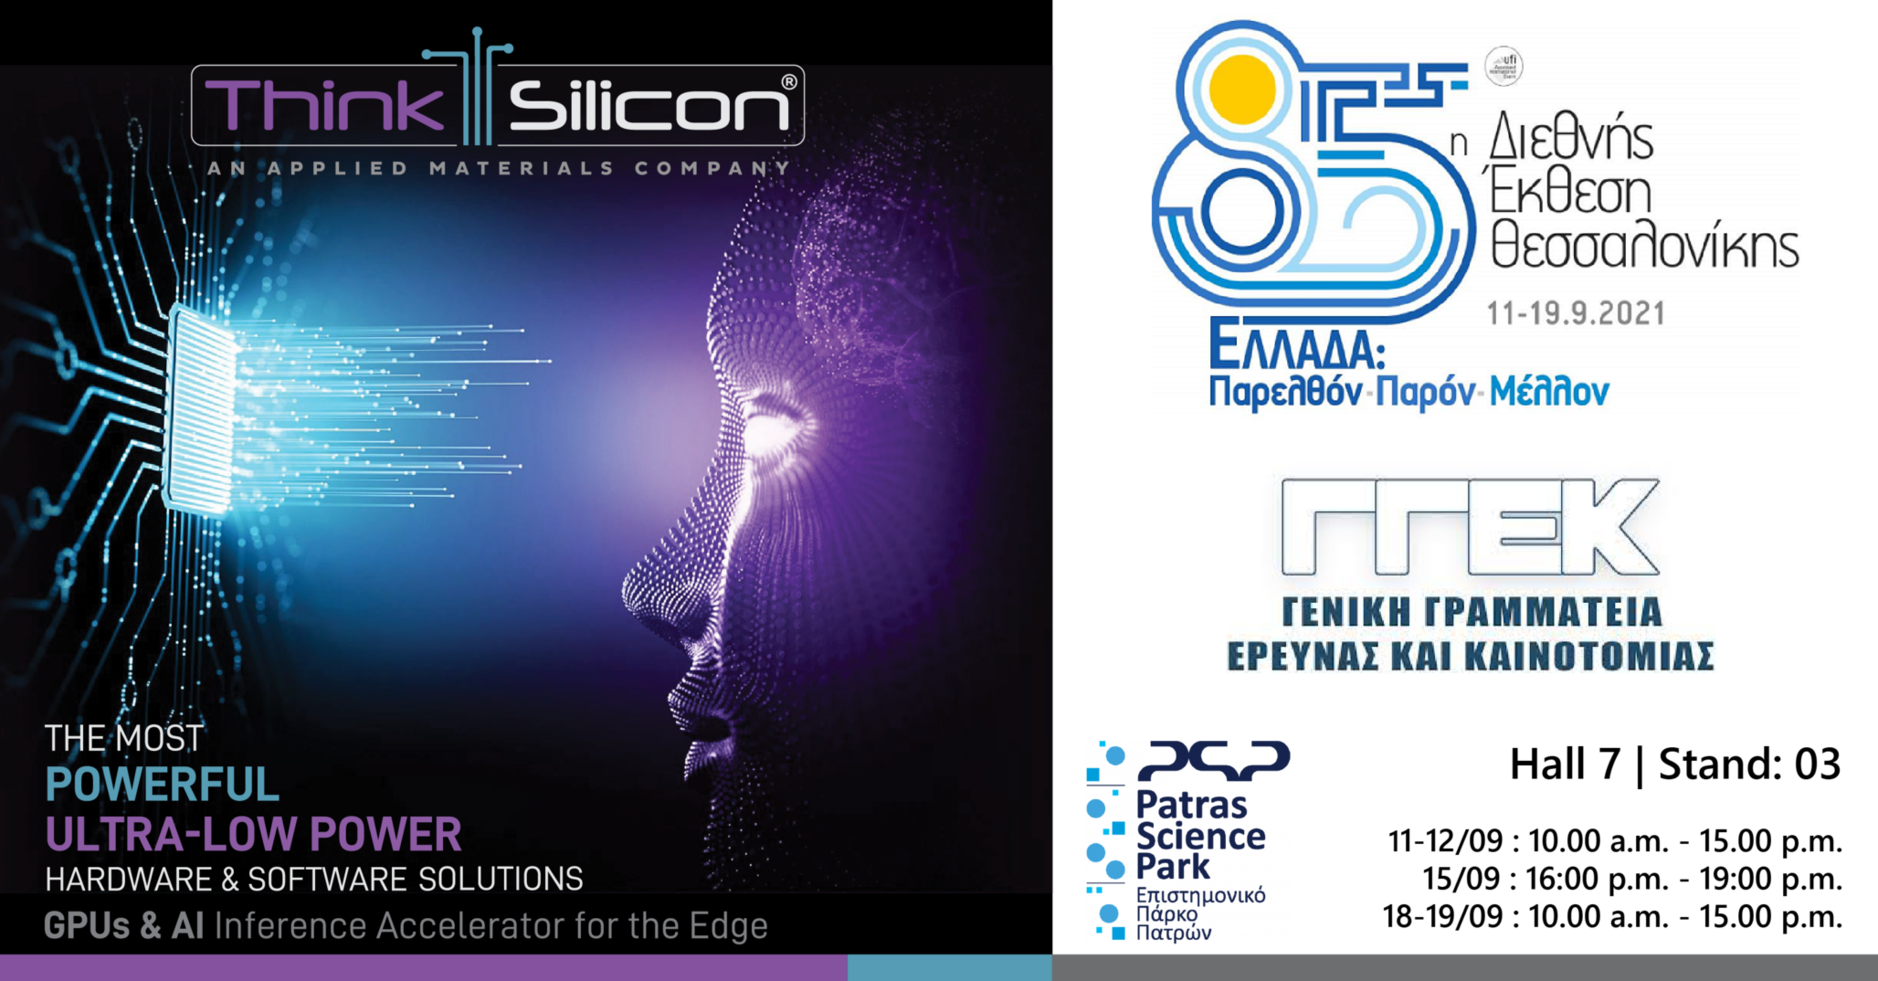 Think Silicon at the 85th Thessaloniki International Fair